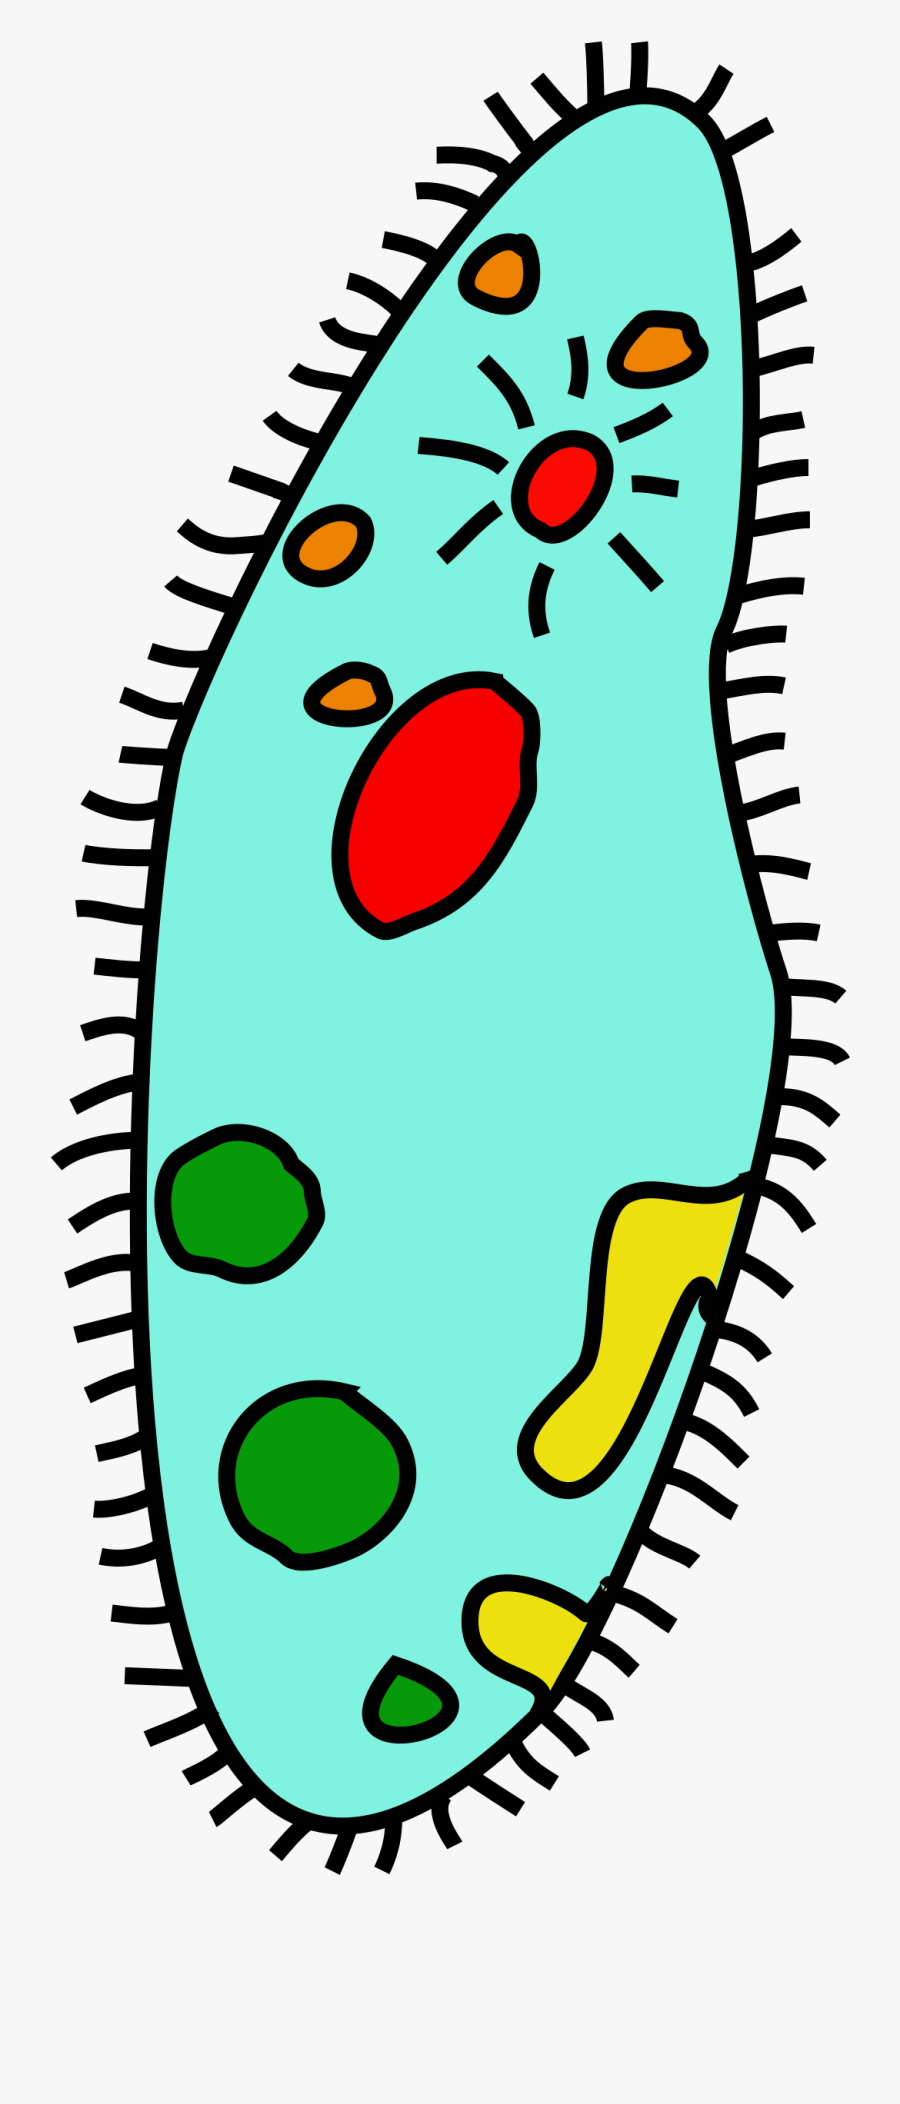 Transparent Library Single Celled Organisms Clipground - Single Celled Organism Clipart, Transparent Clipart